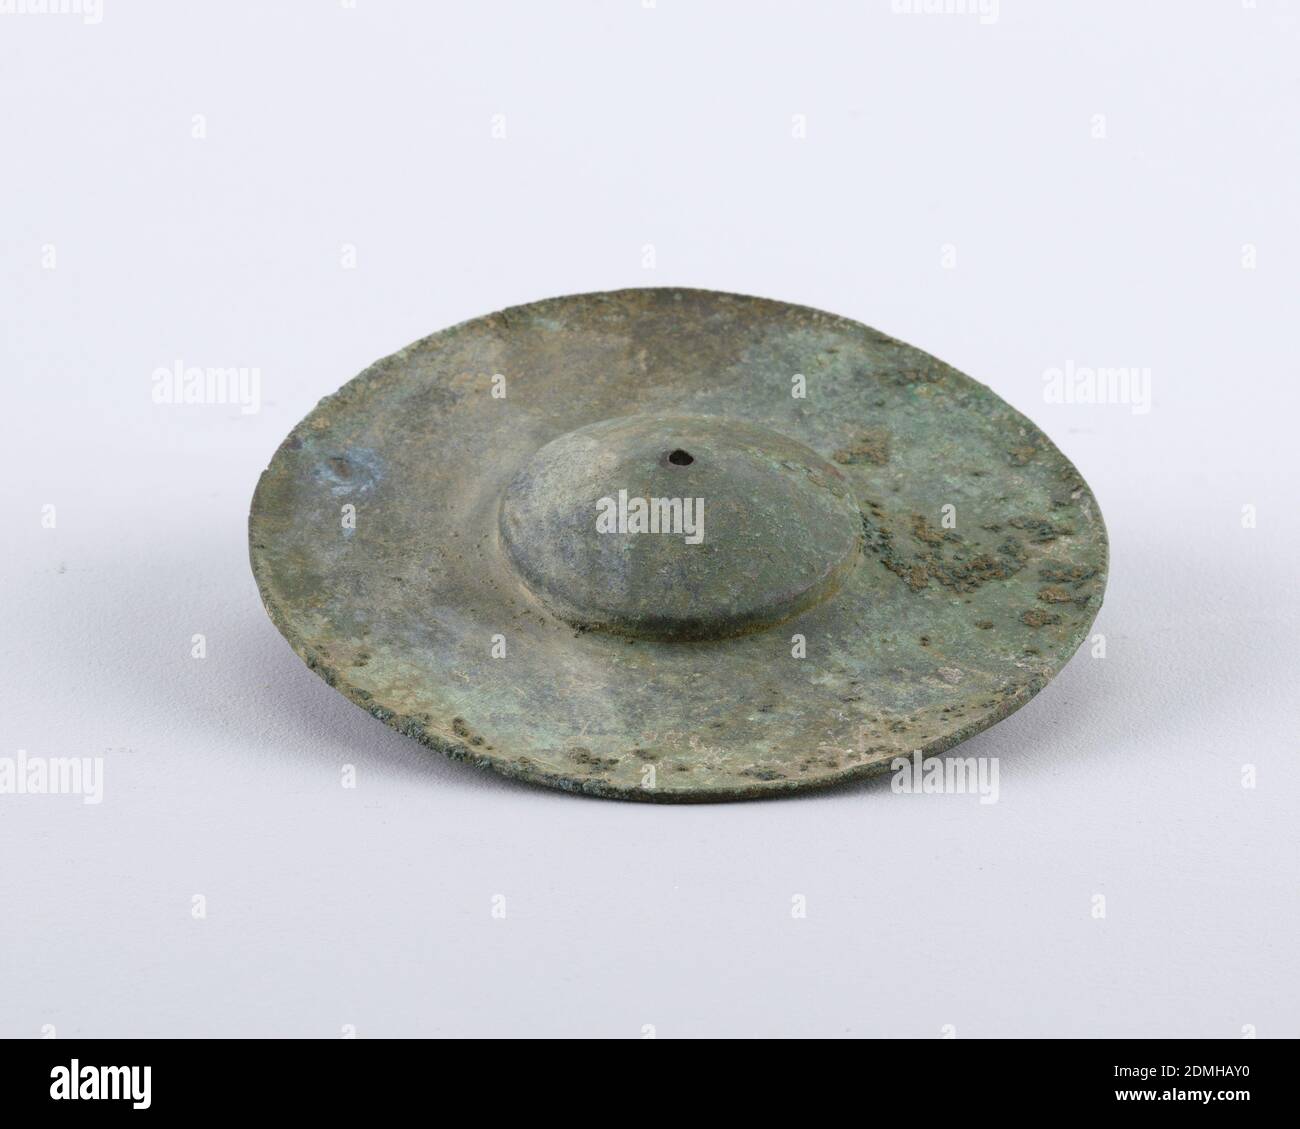 Cymbals, Bronze, Circular form with raised dome, small hole in center. Green patina., Luristan (western Iran), ca. 1000 BCE, metalwork, Decorative Arts, Cymbals Stock Photo